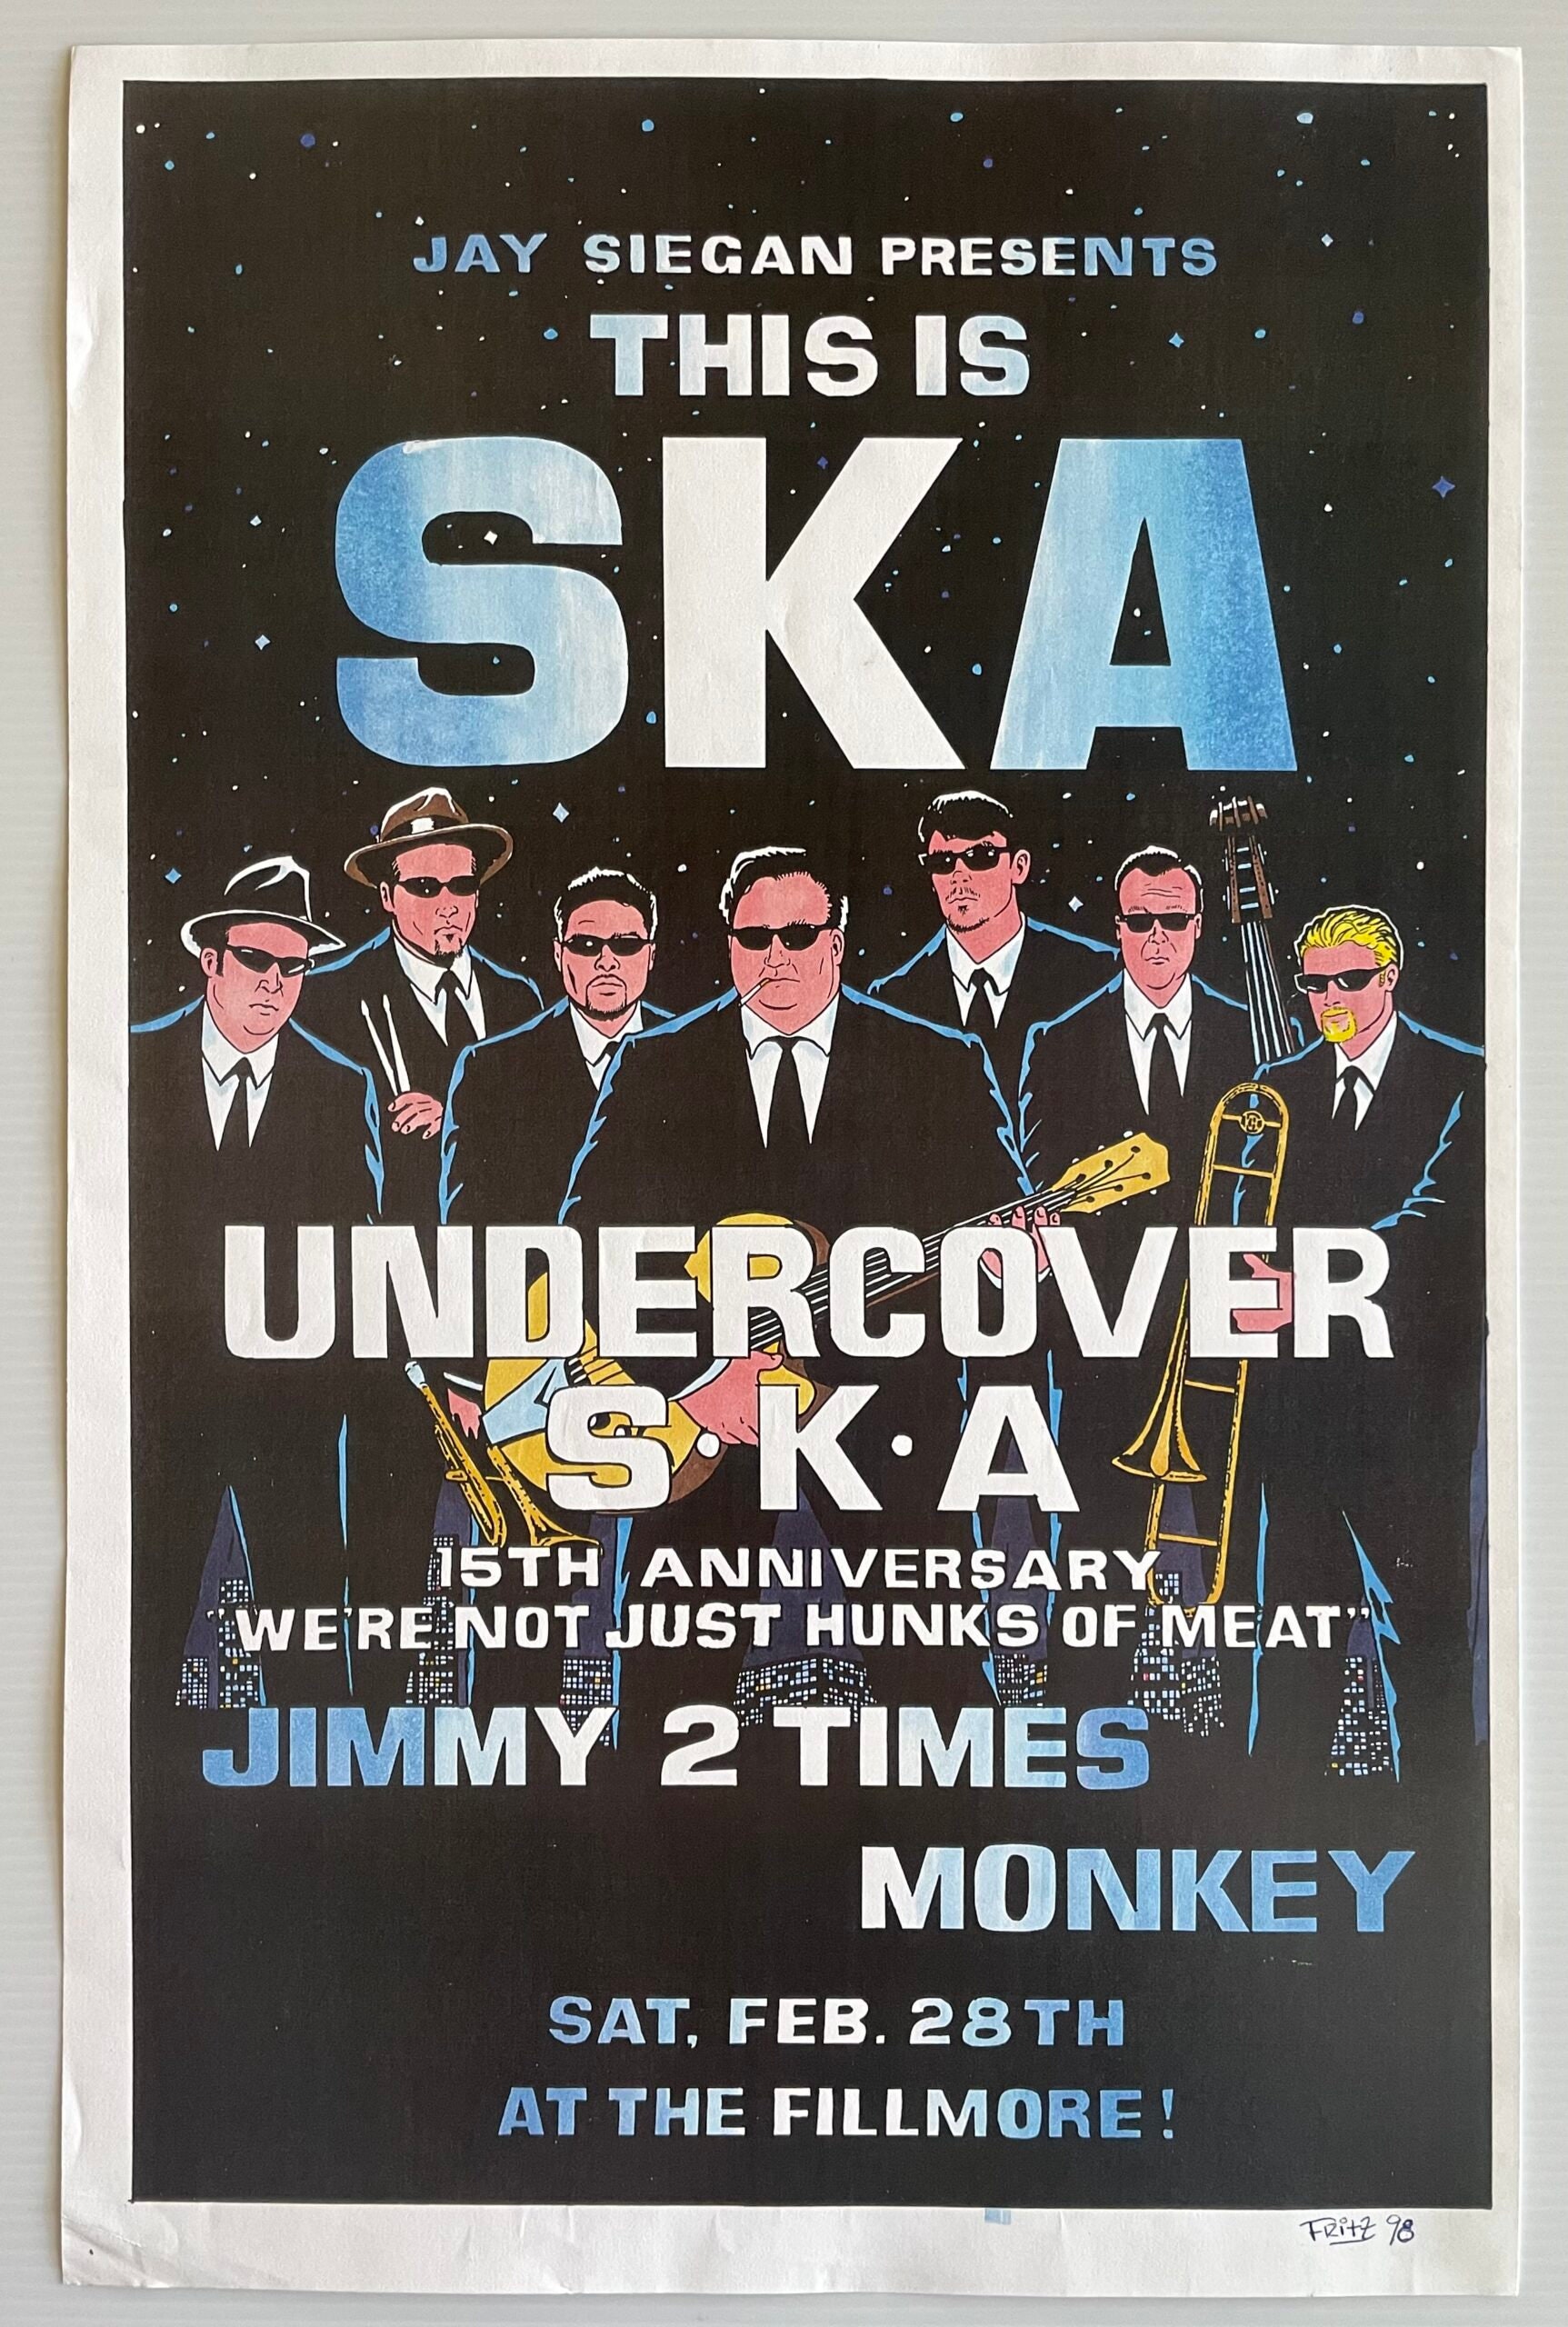 Undercover S.K.A. 1998 Concert Poster Fillmore - Etsy